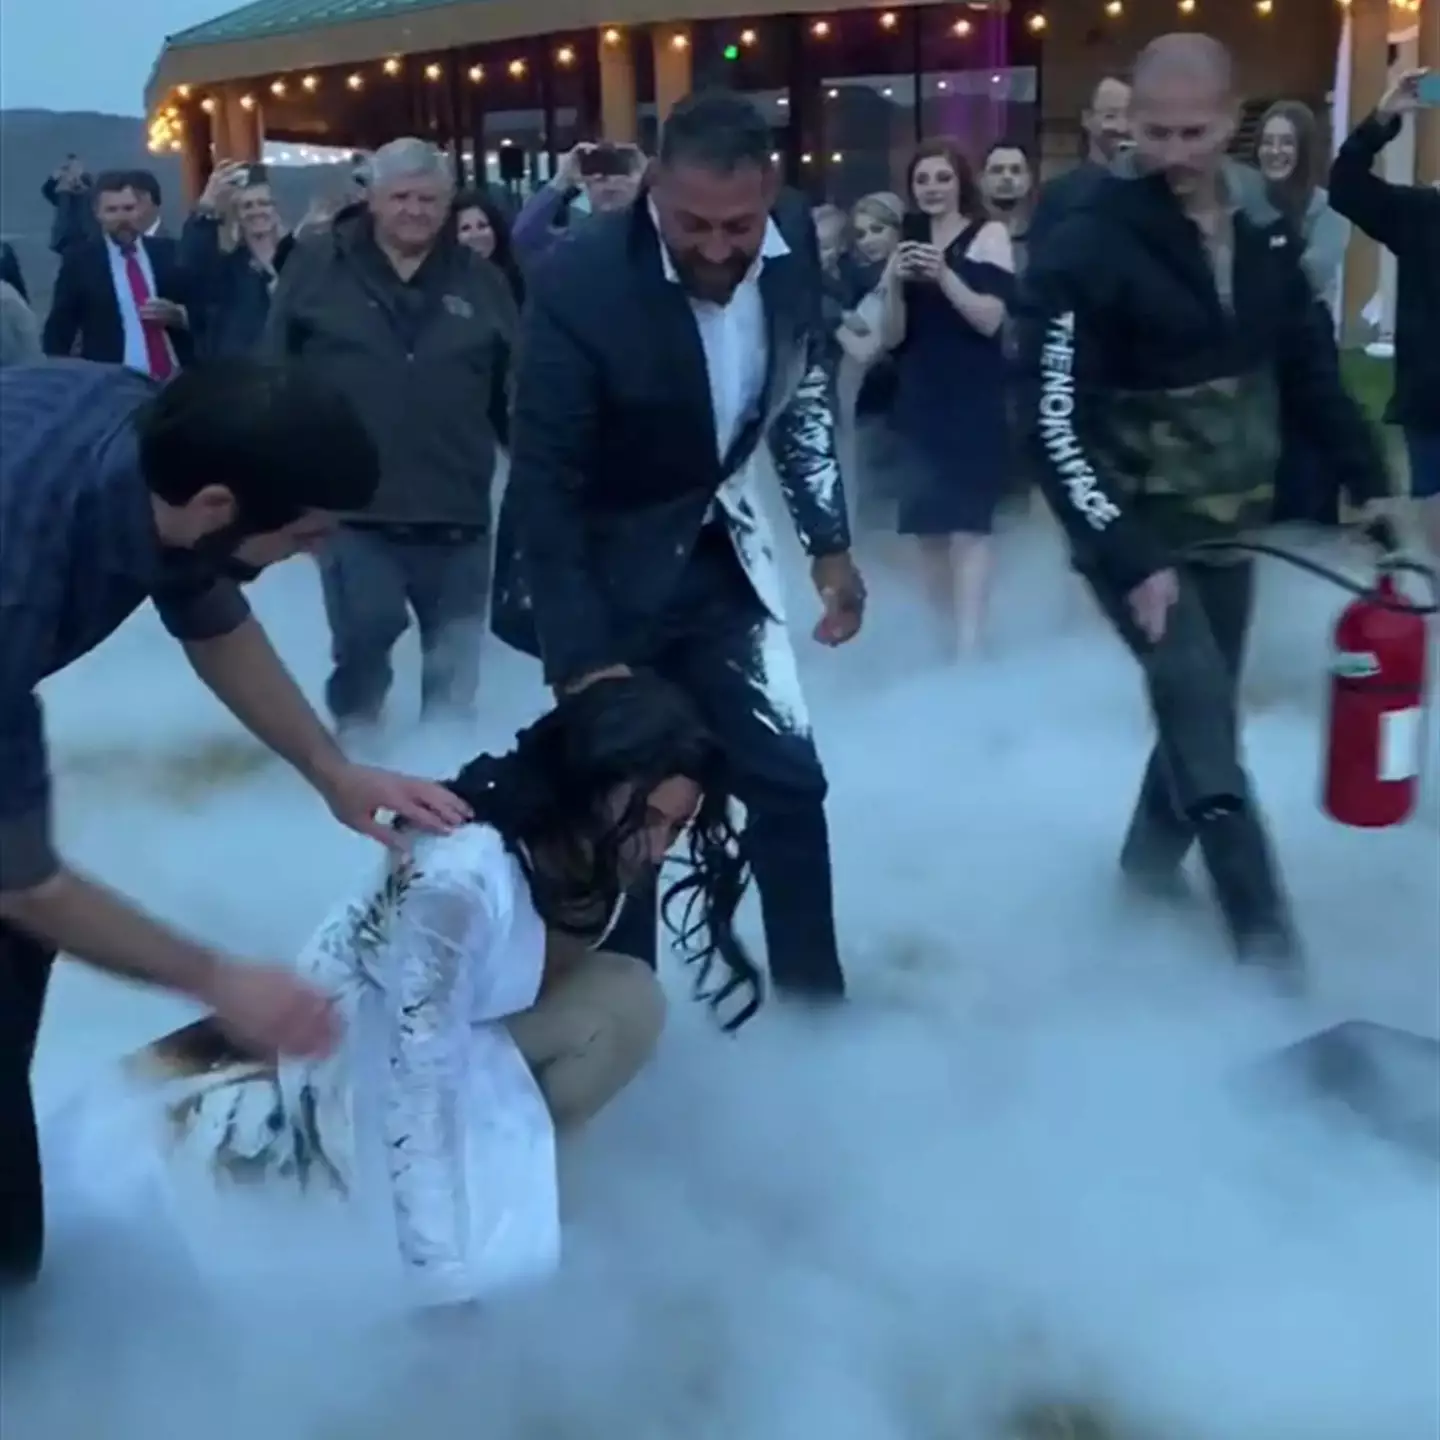 Extinguishers were on hand to put the couple out.